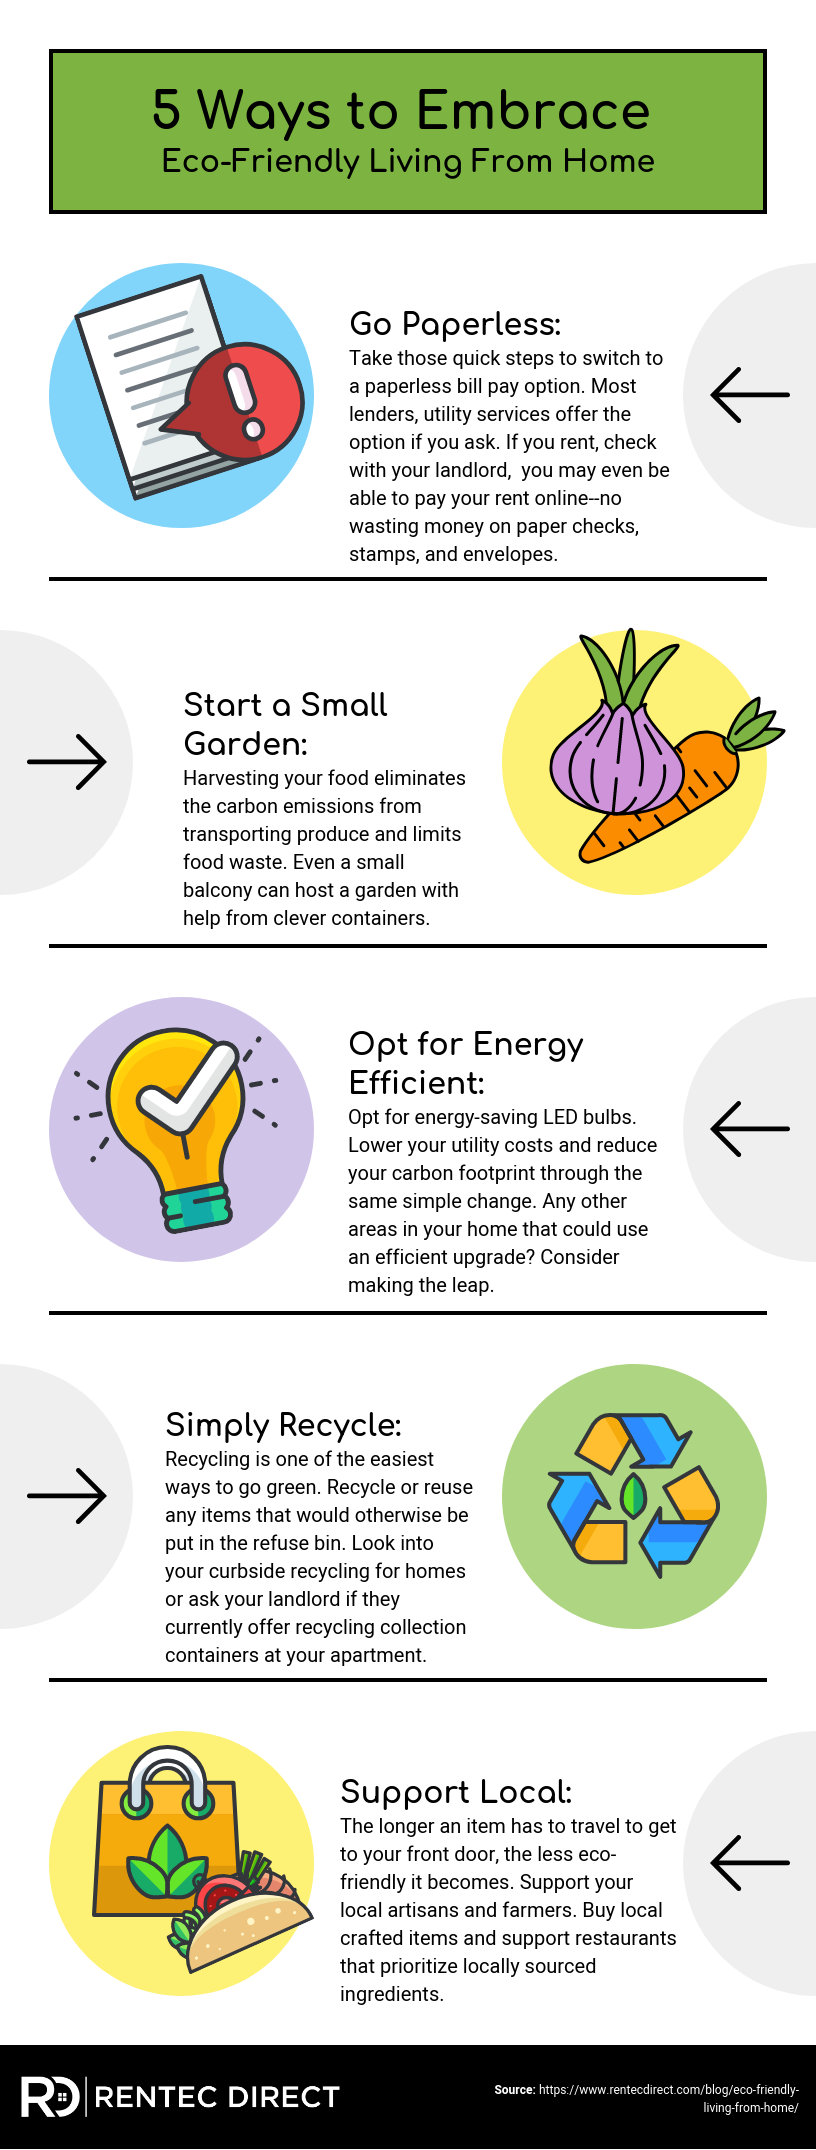 6 Eco-Friendly Organization Tips to Reduce Waste and Clutter